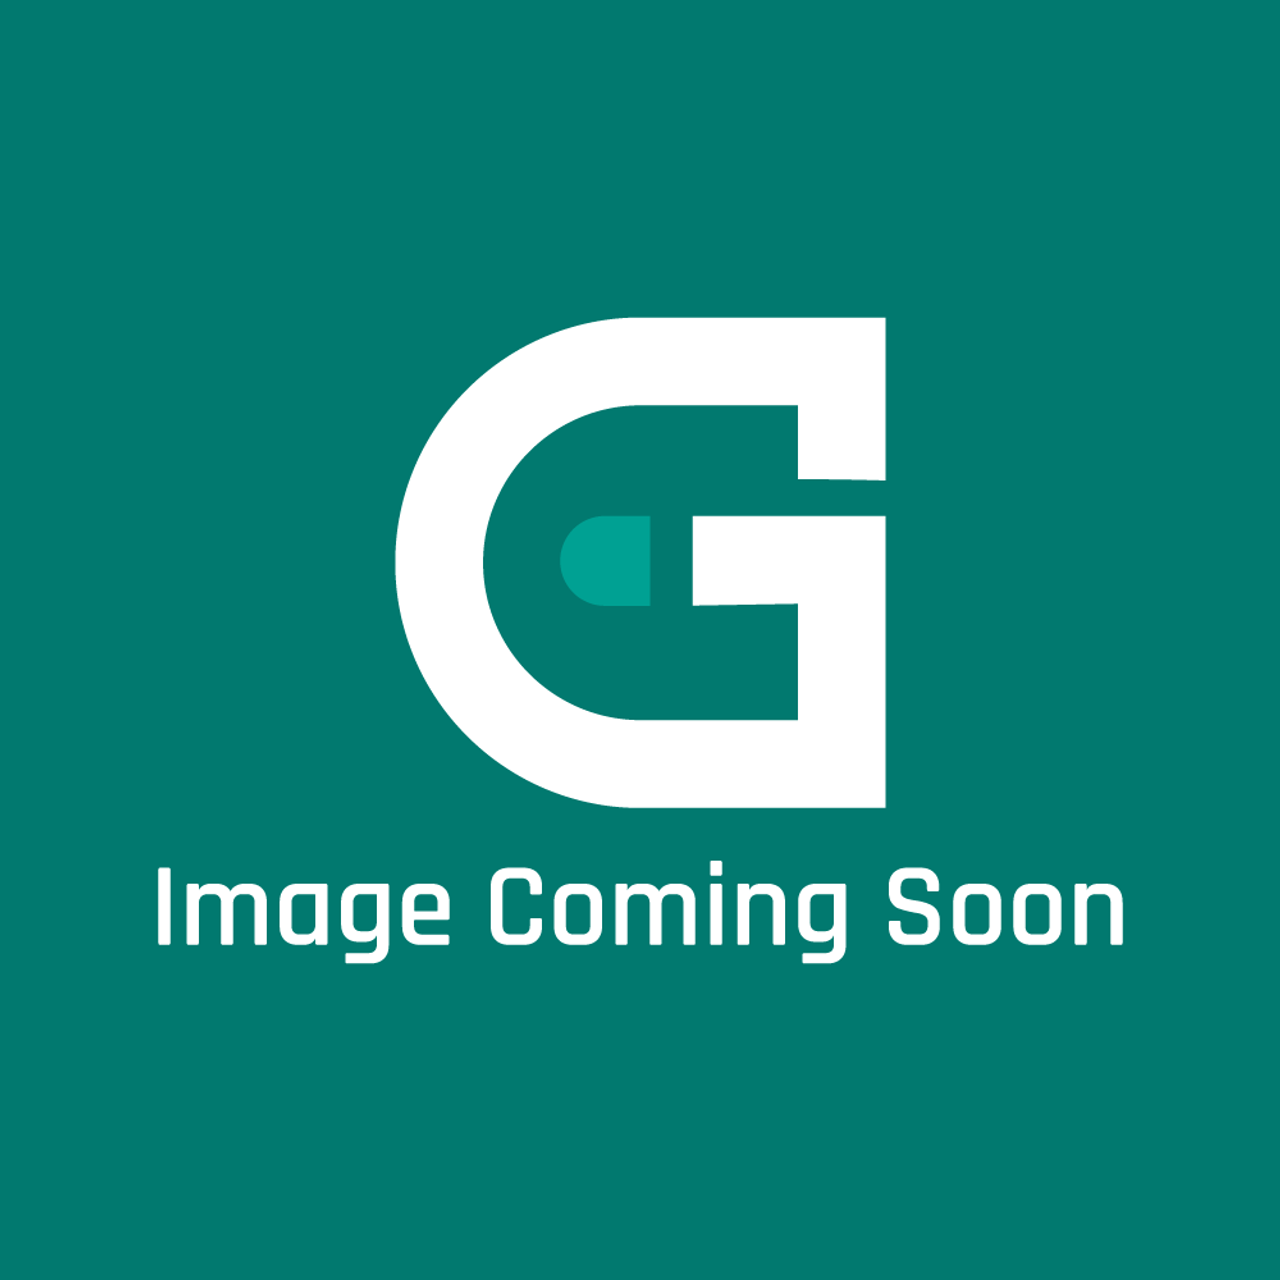 Frigidaire - Electrolux 134925001 - Cover - Image Coming Soon!